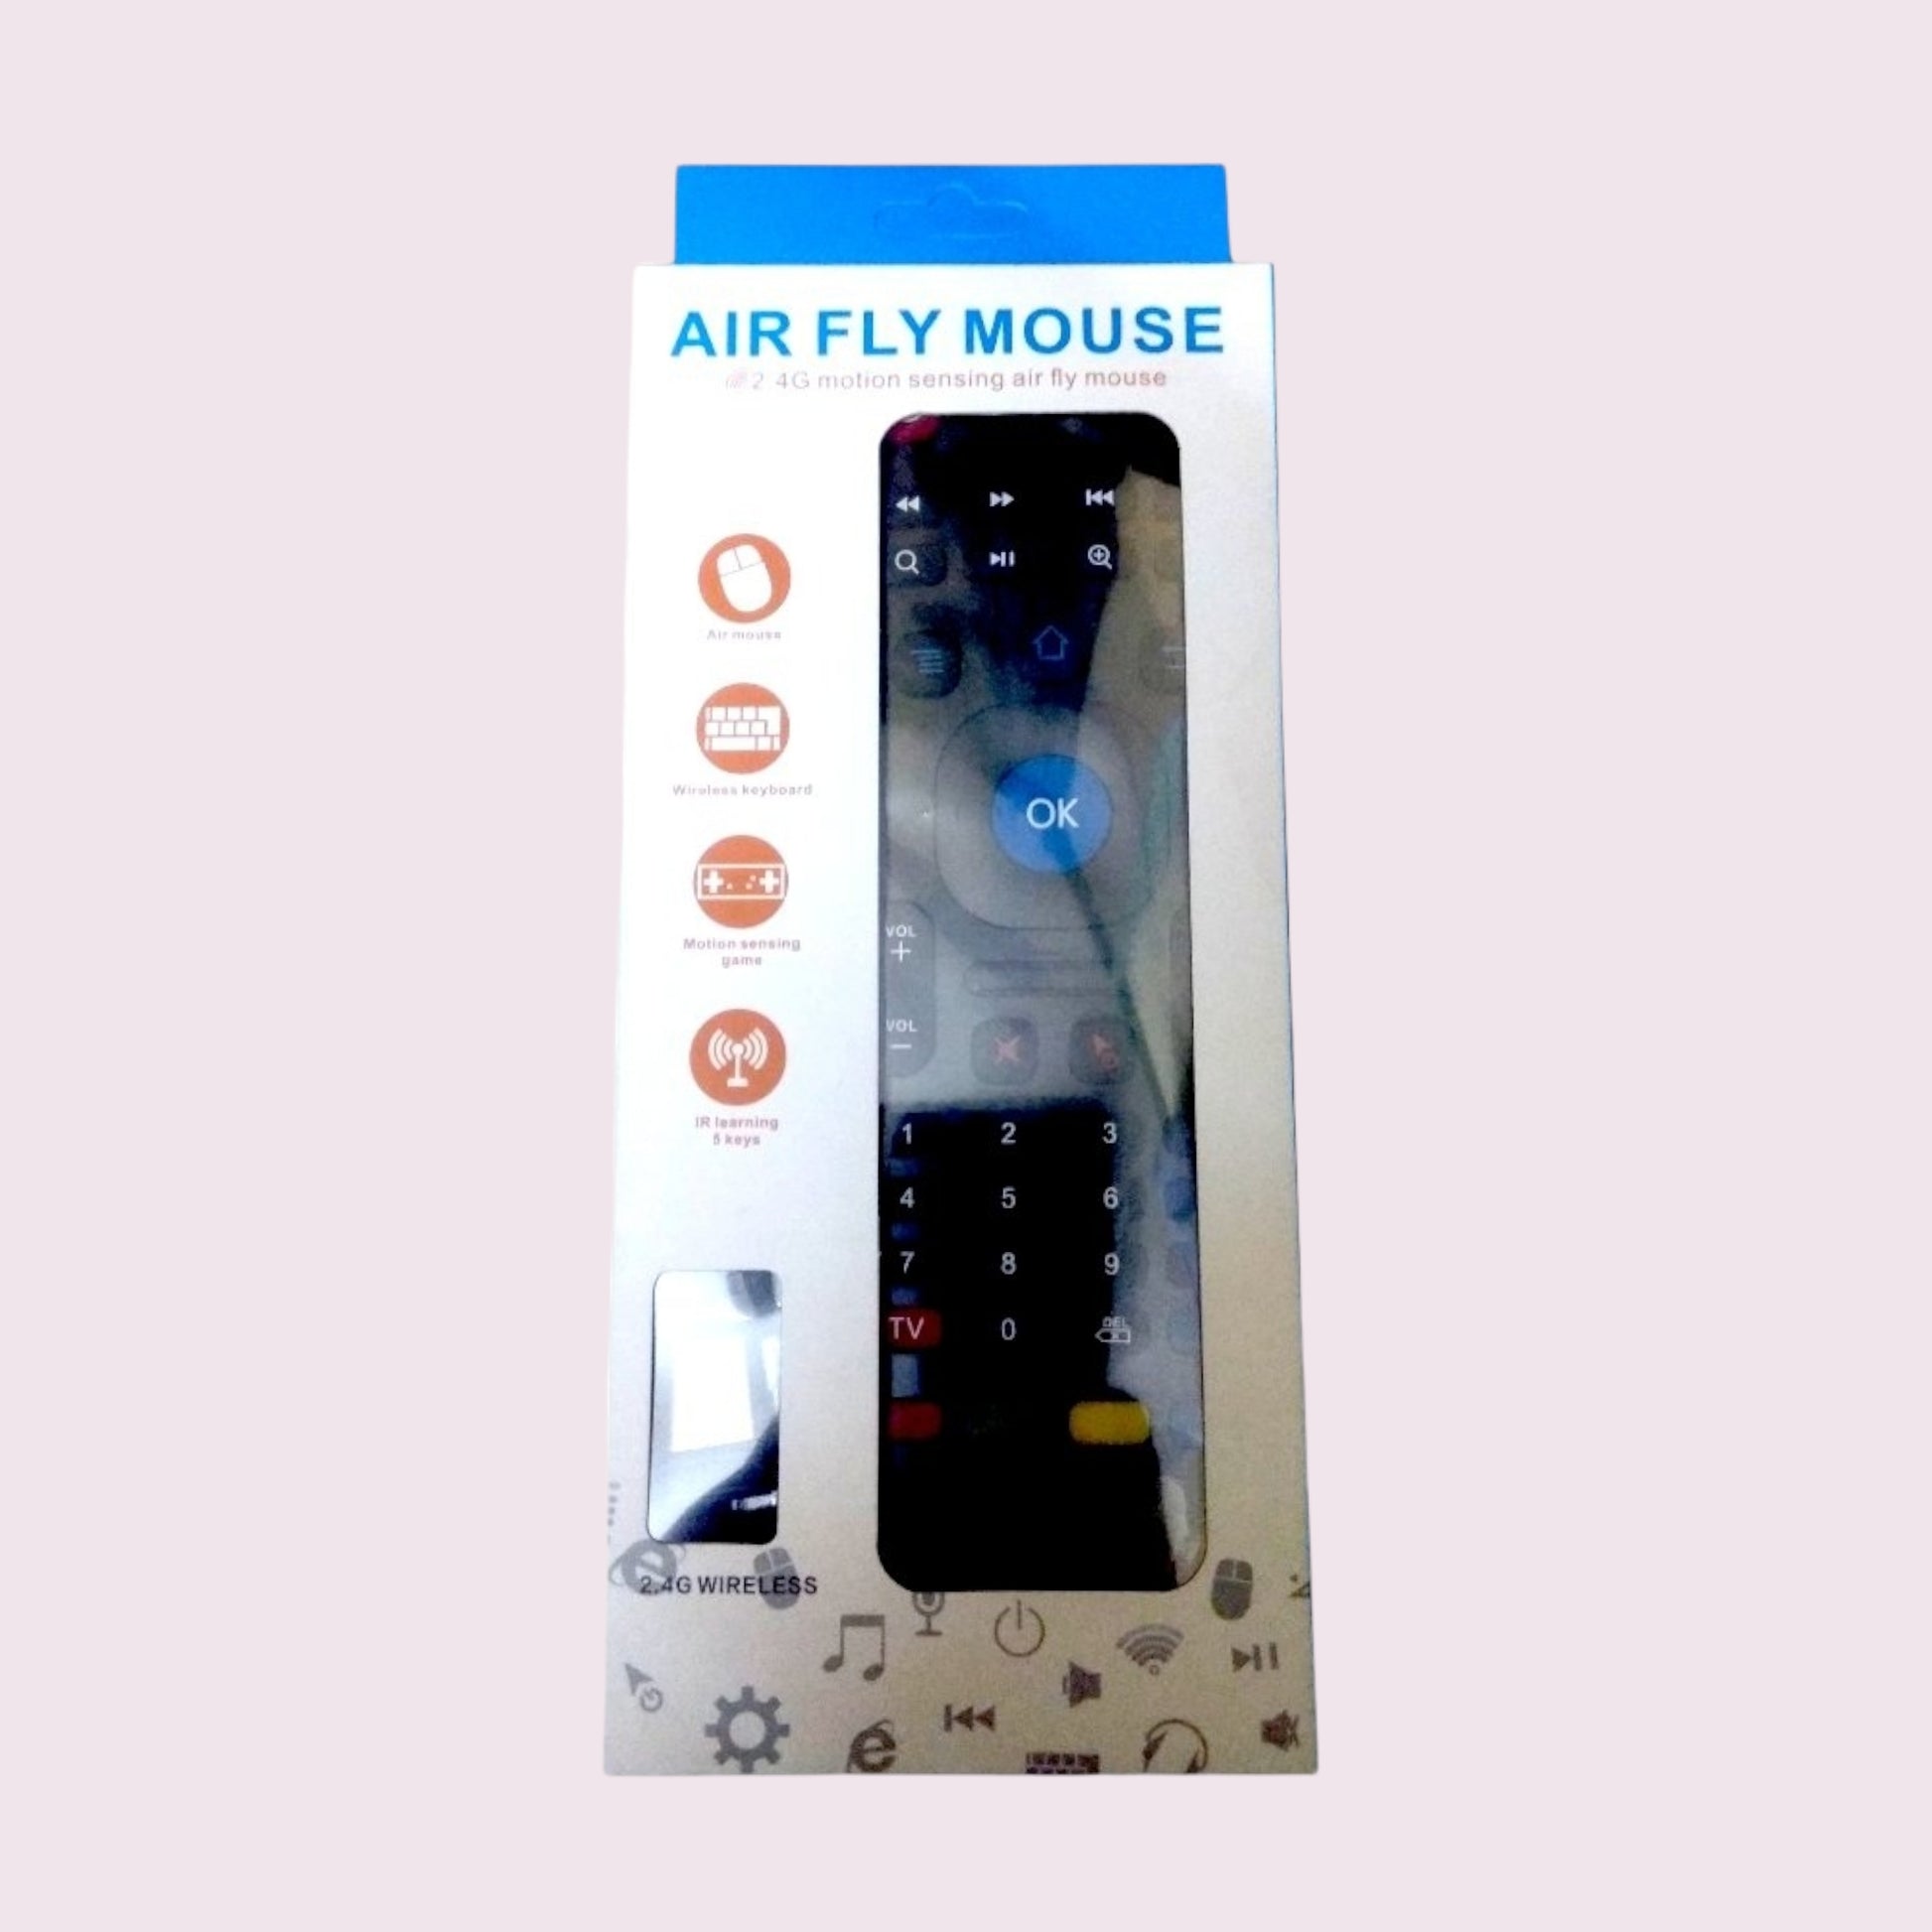 Air Fly Mouse 2.4 G motion sensing air fly mouse Hybite Ir Smart Tv,Android Tv Box, Mini Pc, Laptop, Projector, Gaming; Air Mouse Wireless Keyboard Motion Control - Faritha